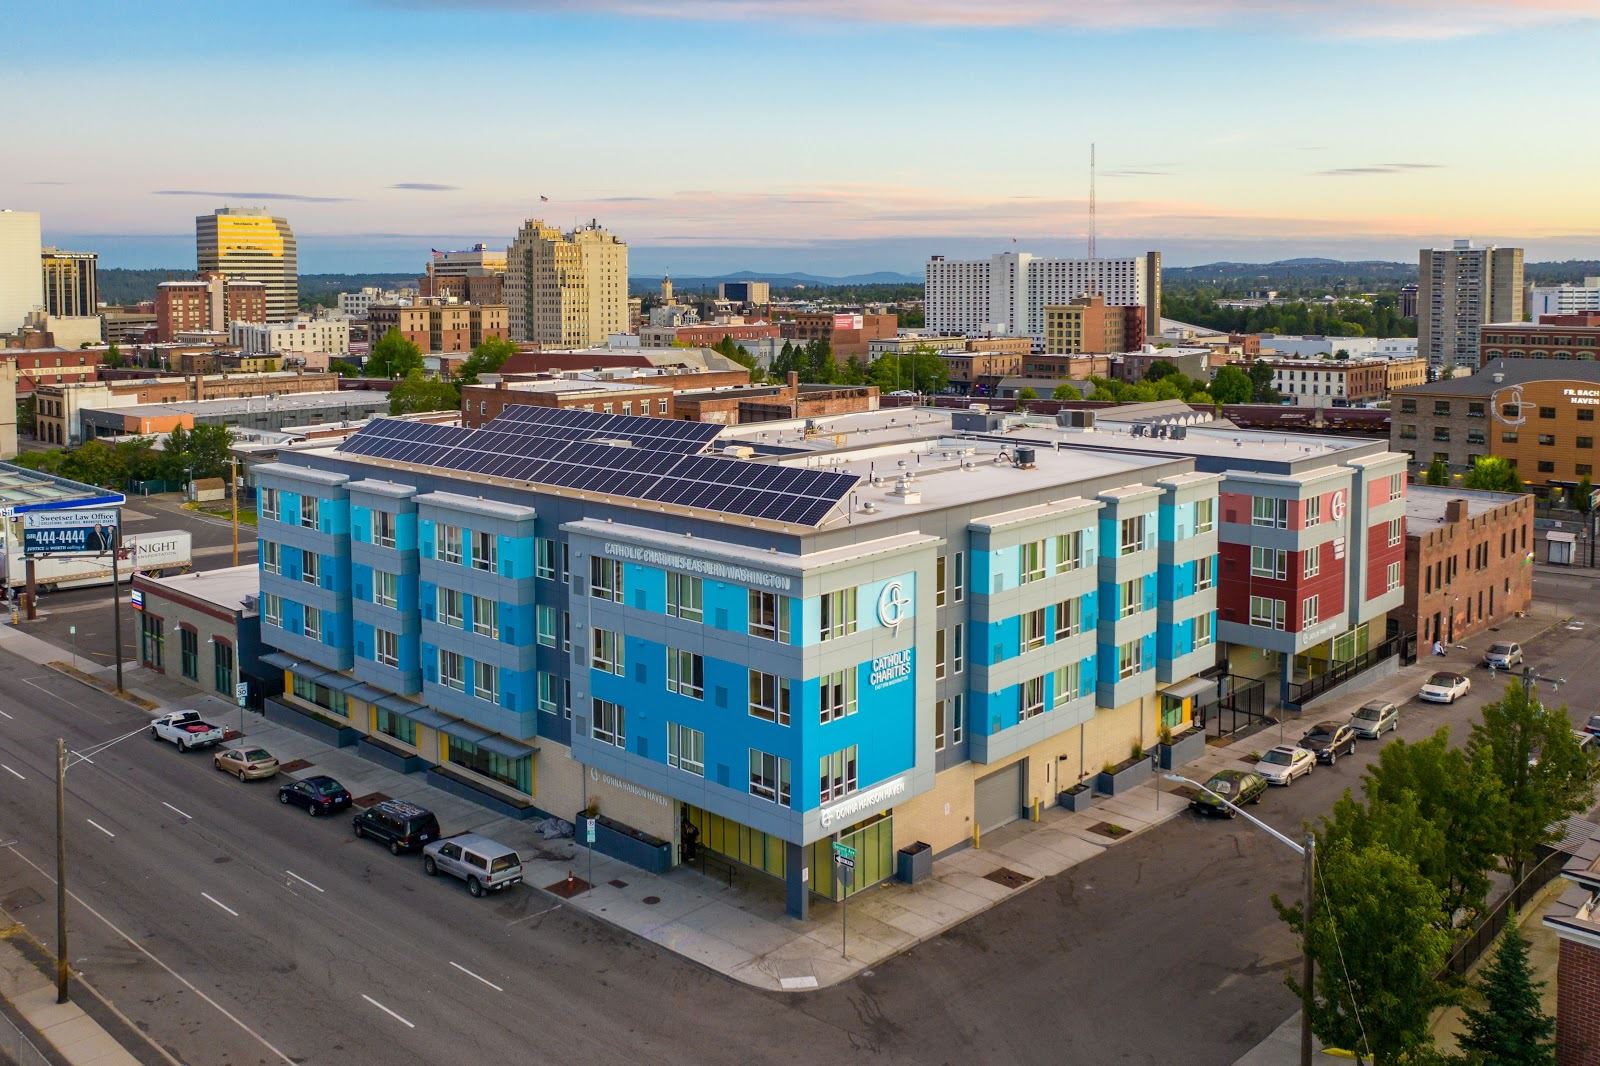 Aerial view of the Jacklin Family Haven building with bright blue cladding and solar panels with the city skyline in the background